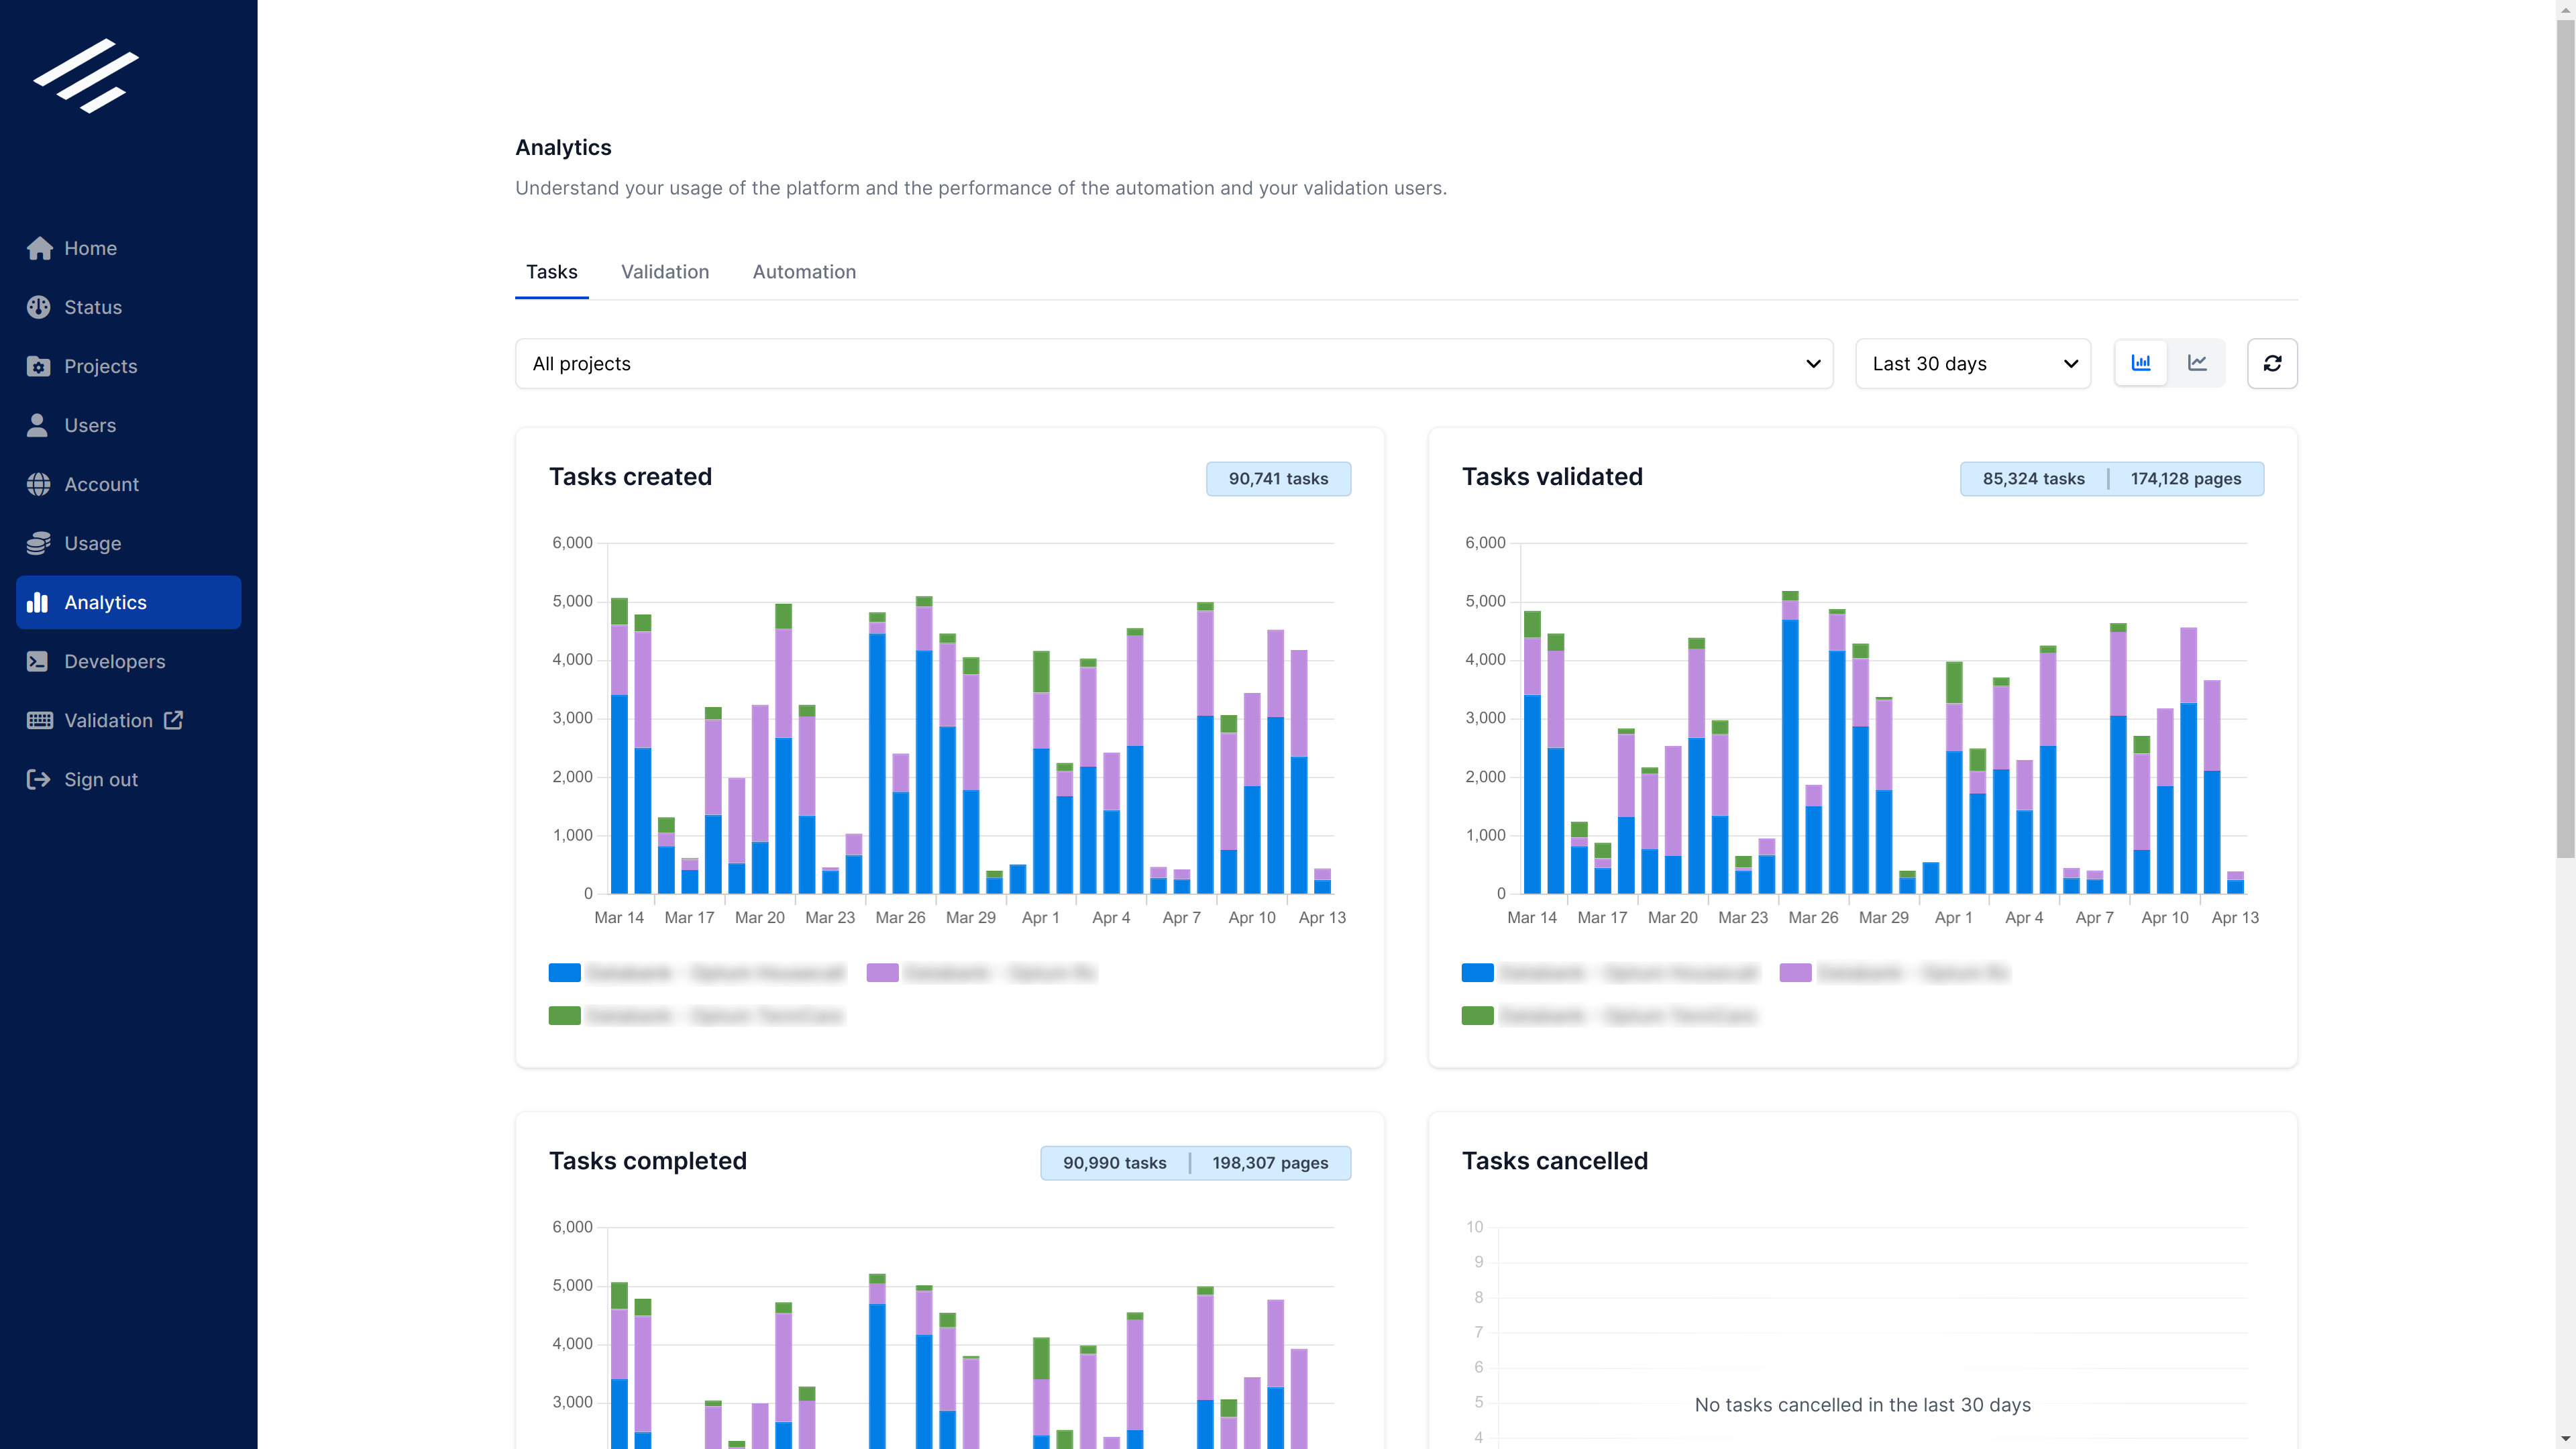 Tasks analytics provide insights into your usage of the platform